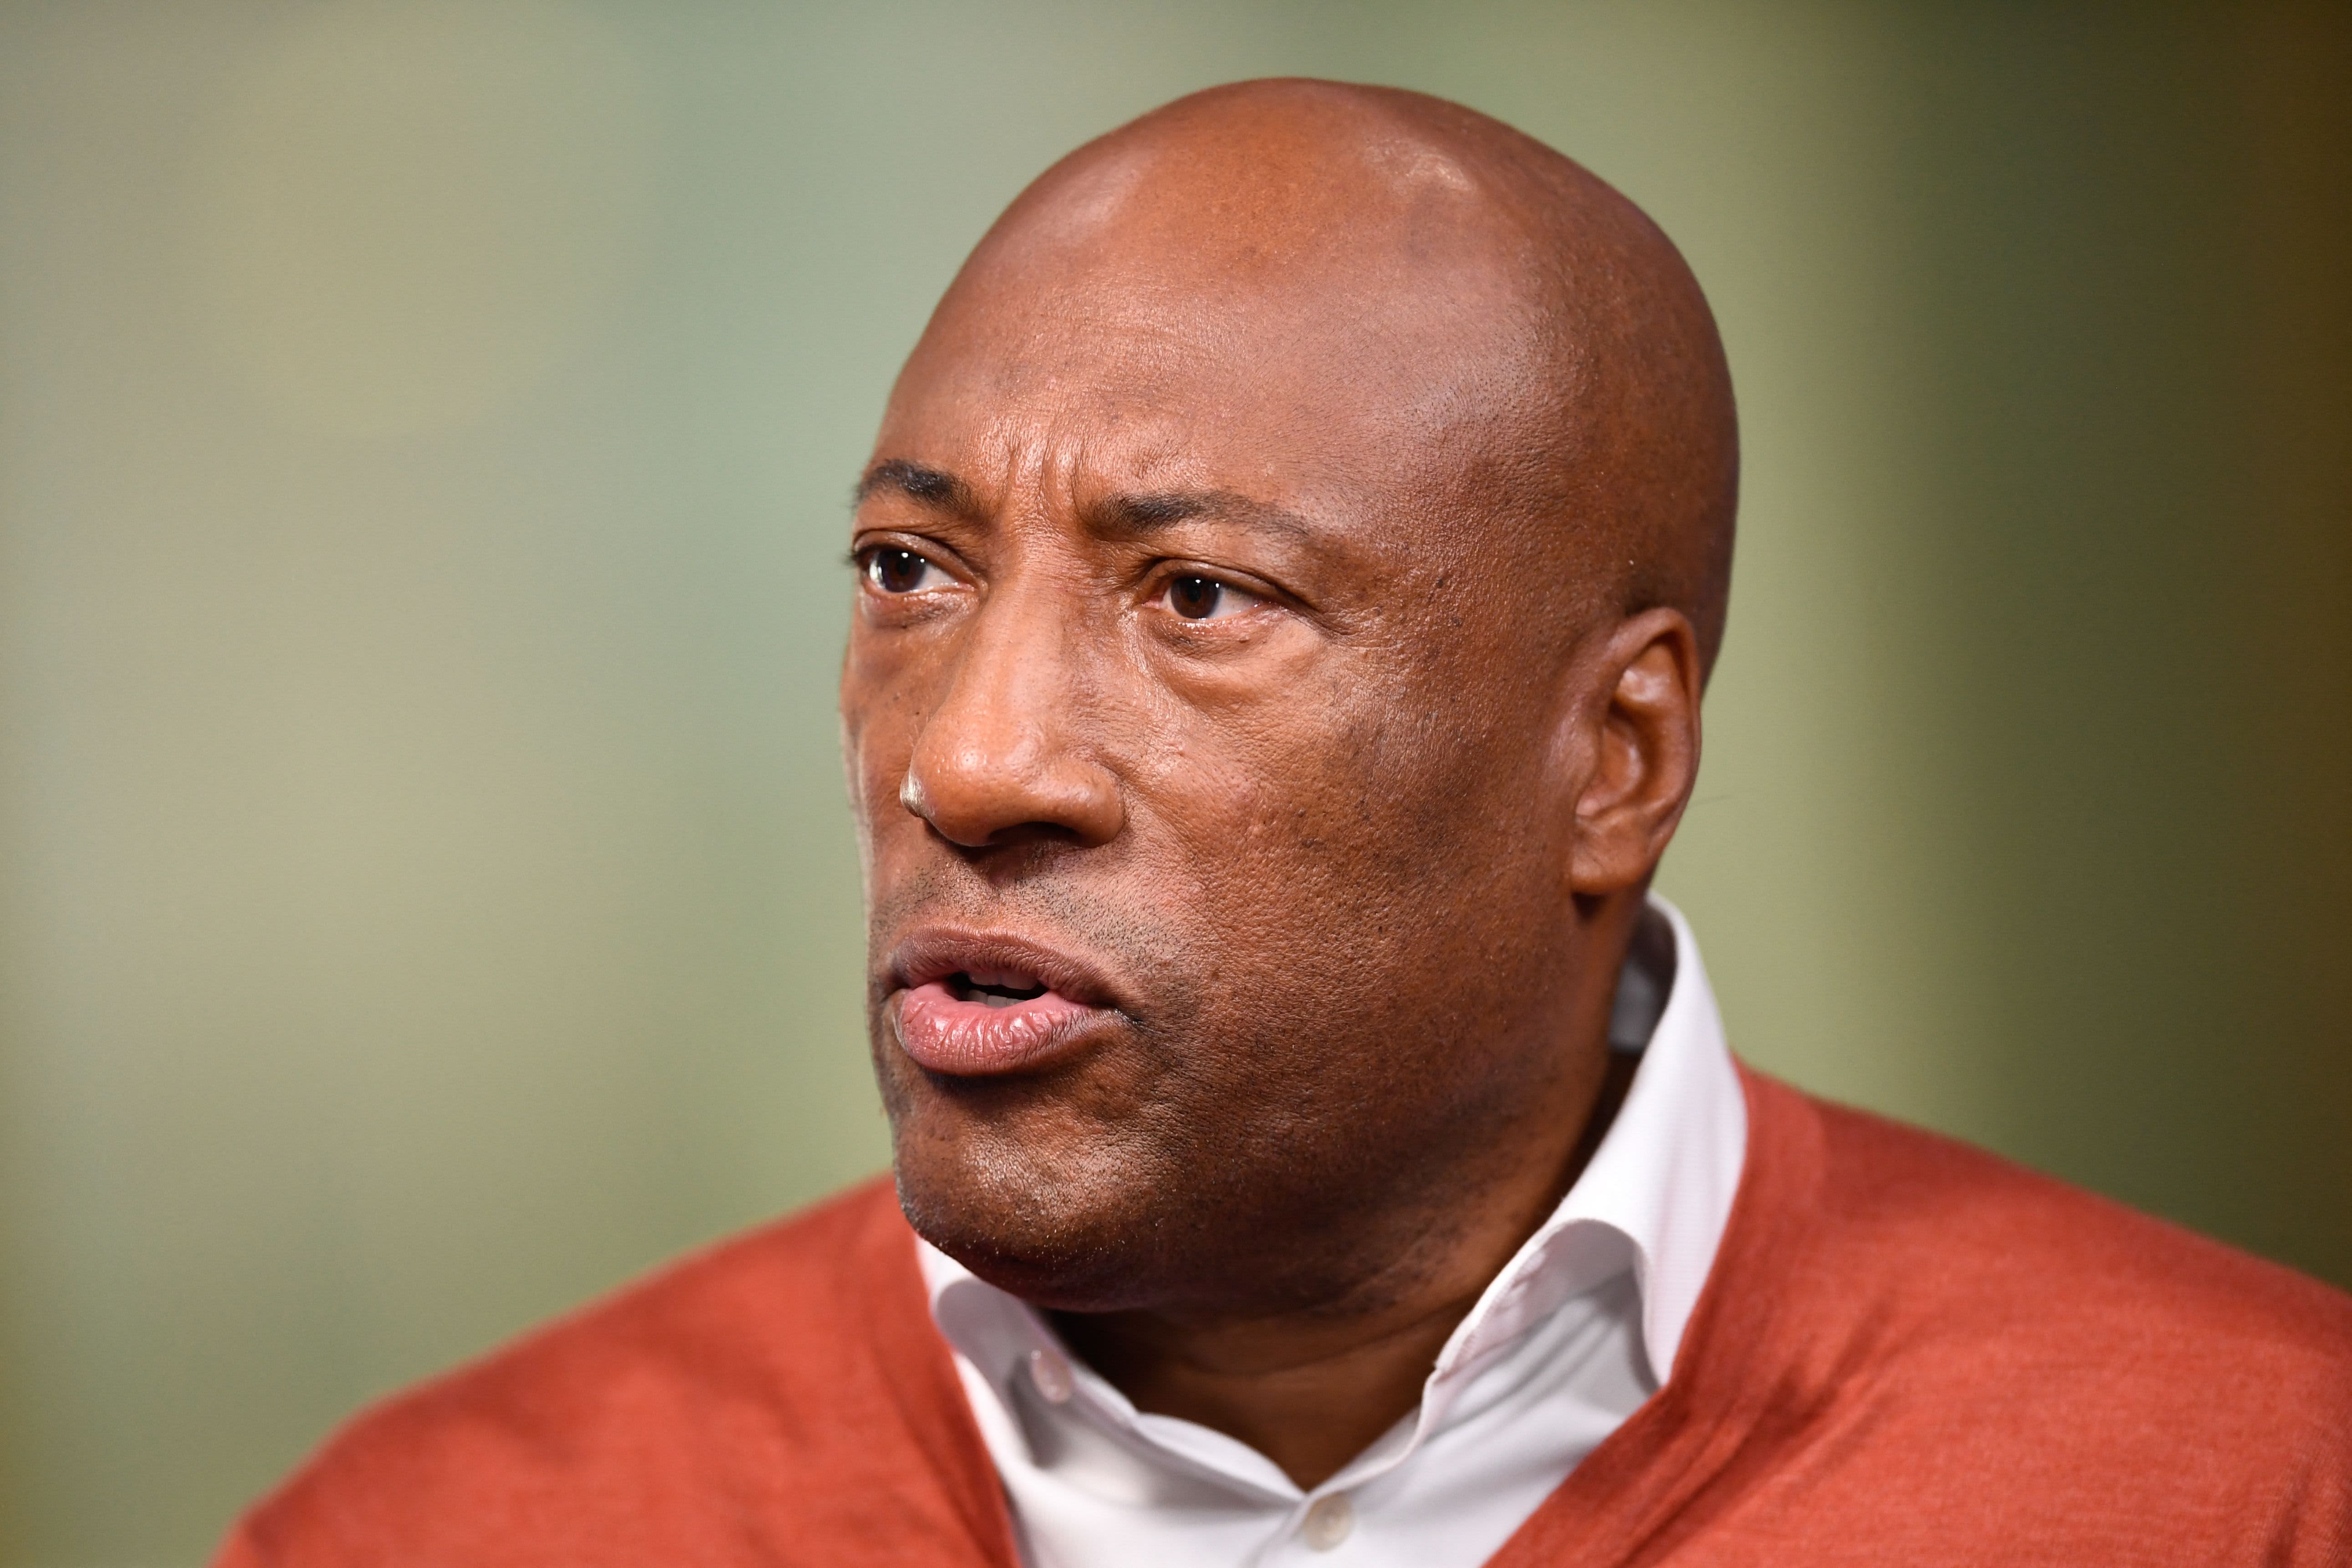 Byron Allen, offering $14 billion for Paramount, has a long history of media bids that haven’t materialized